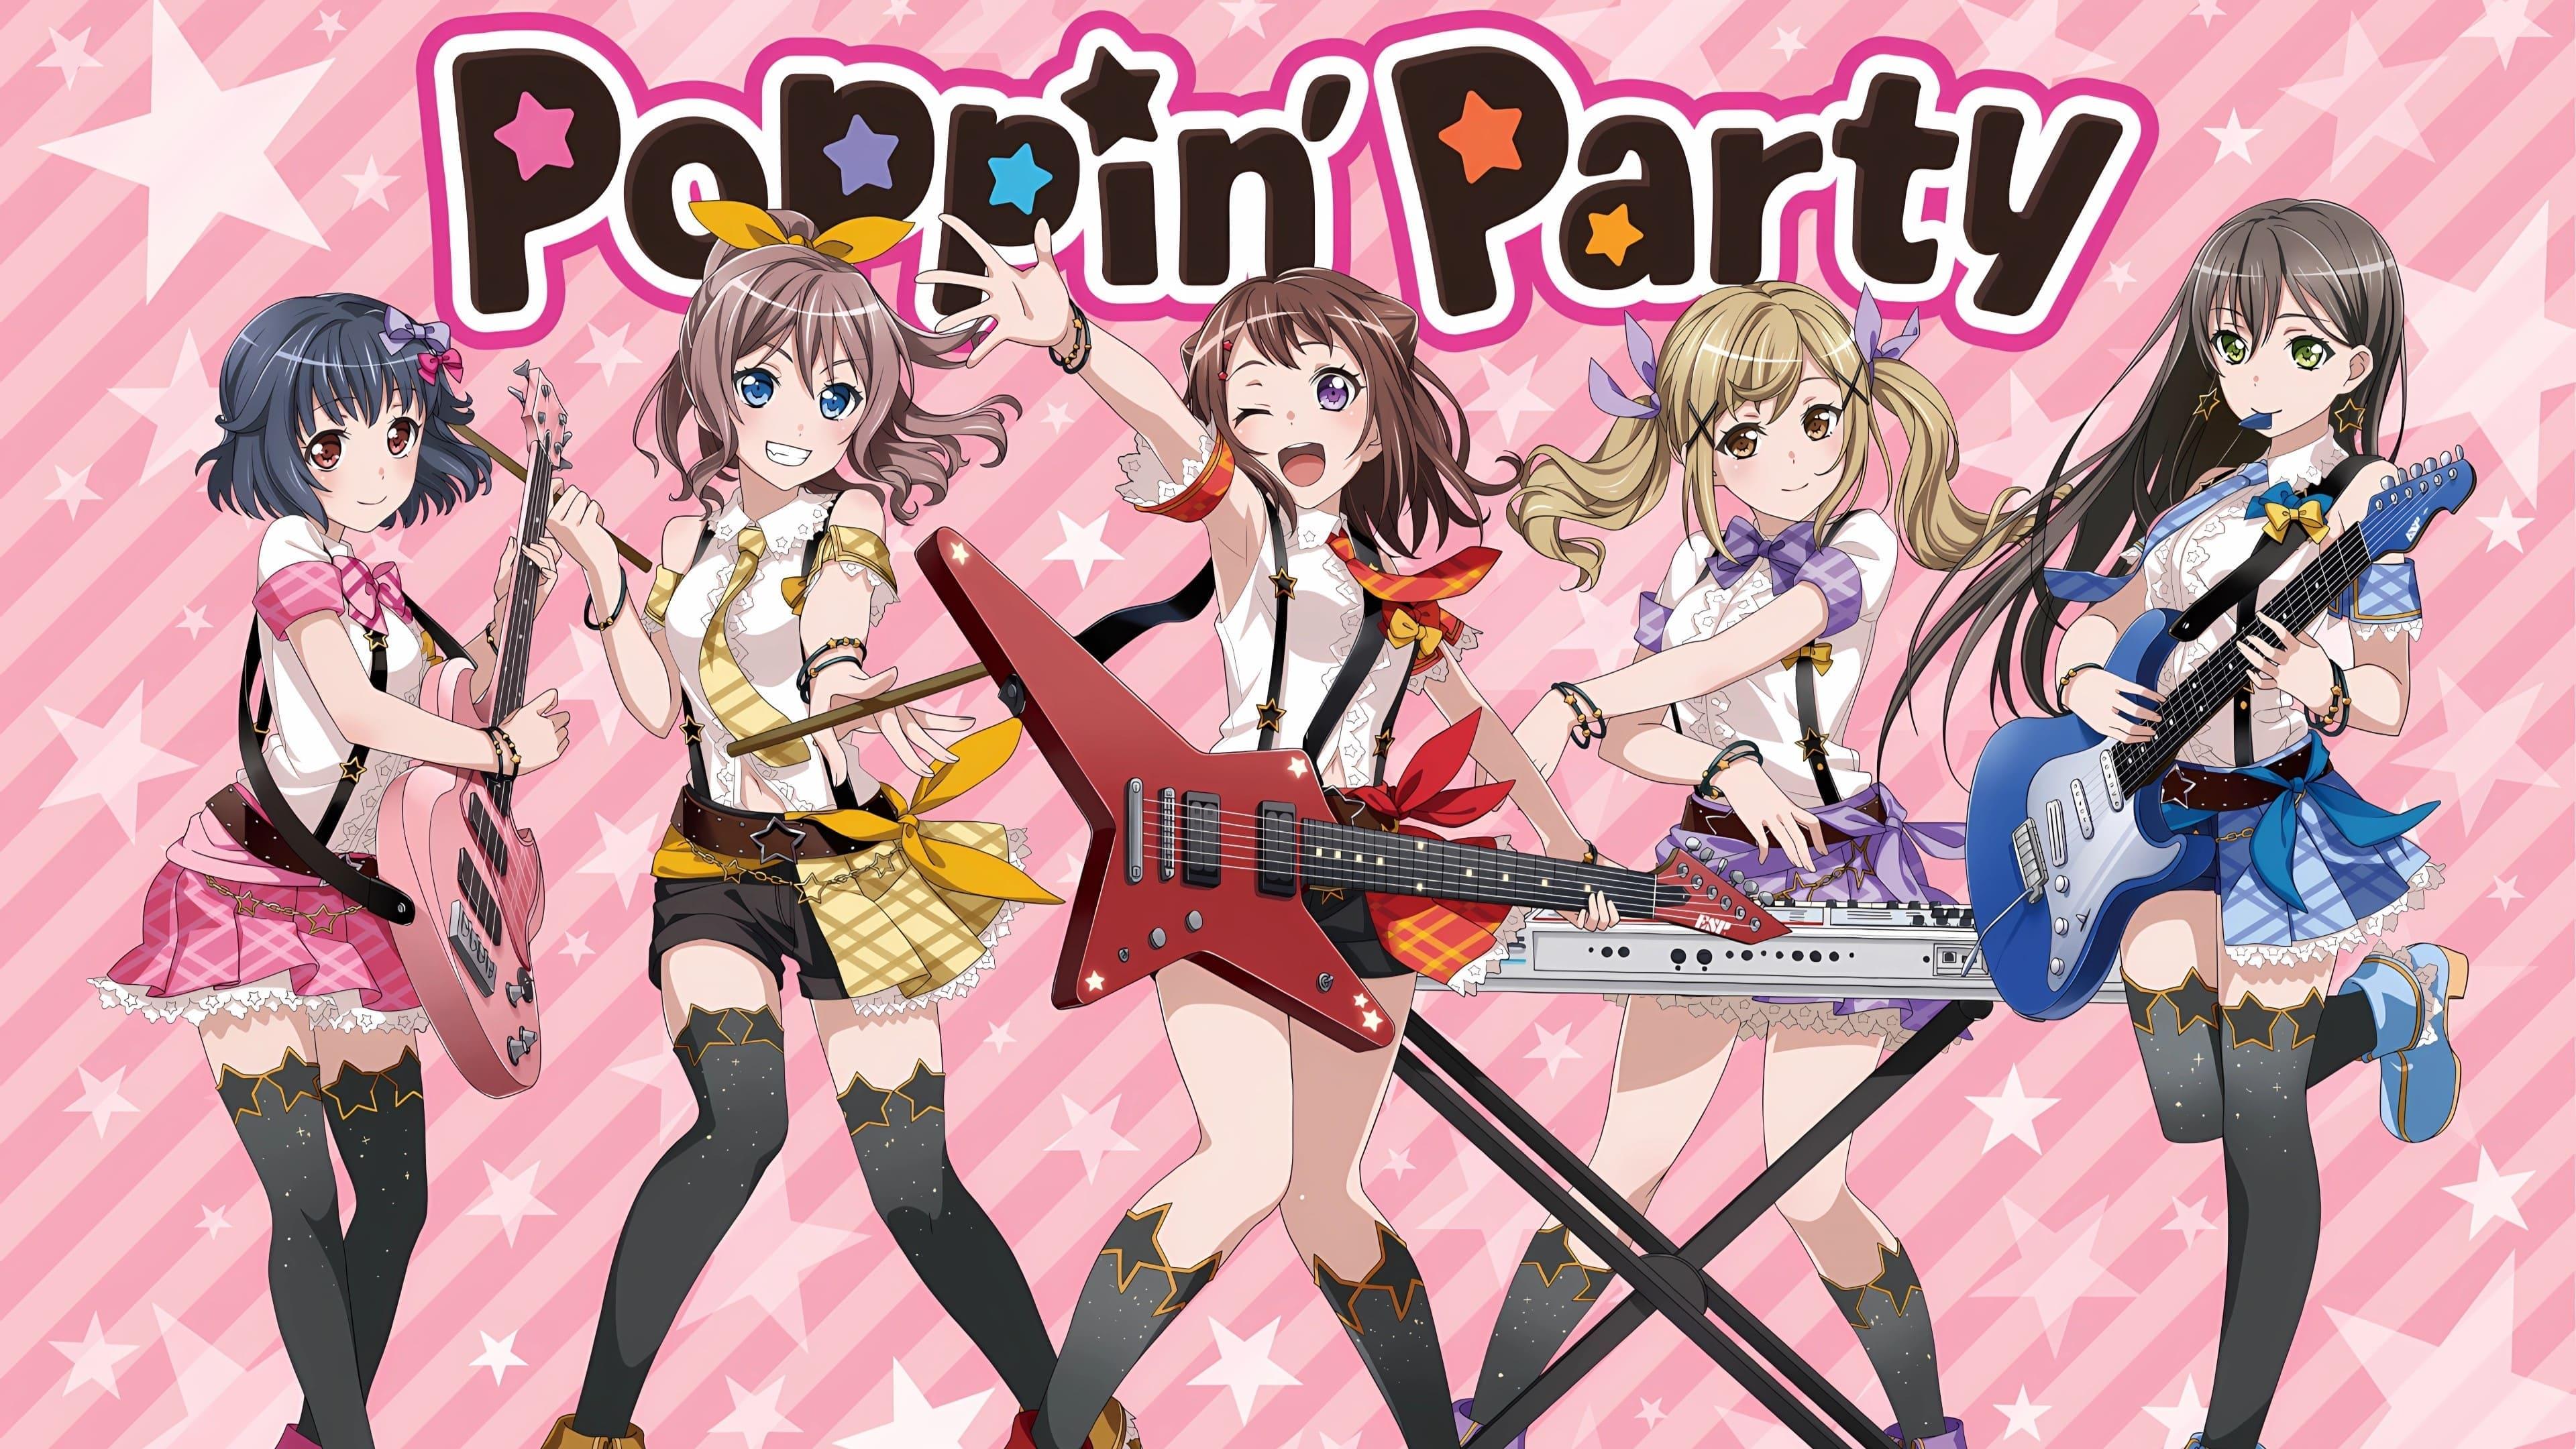 BanG Dream! 1st☆LIVE Sprin'PARTY 2016! backdrop